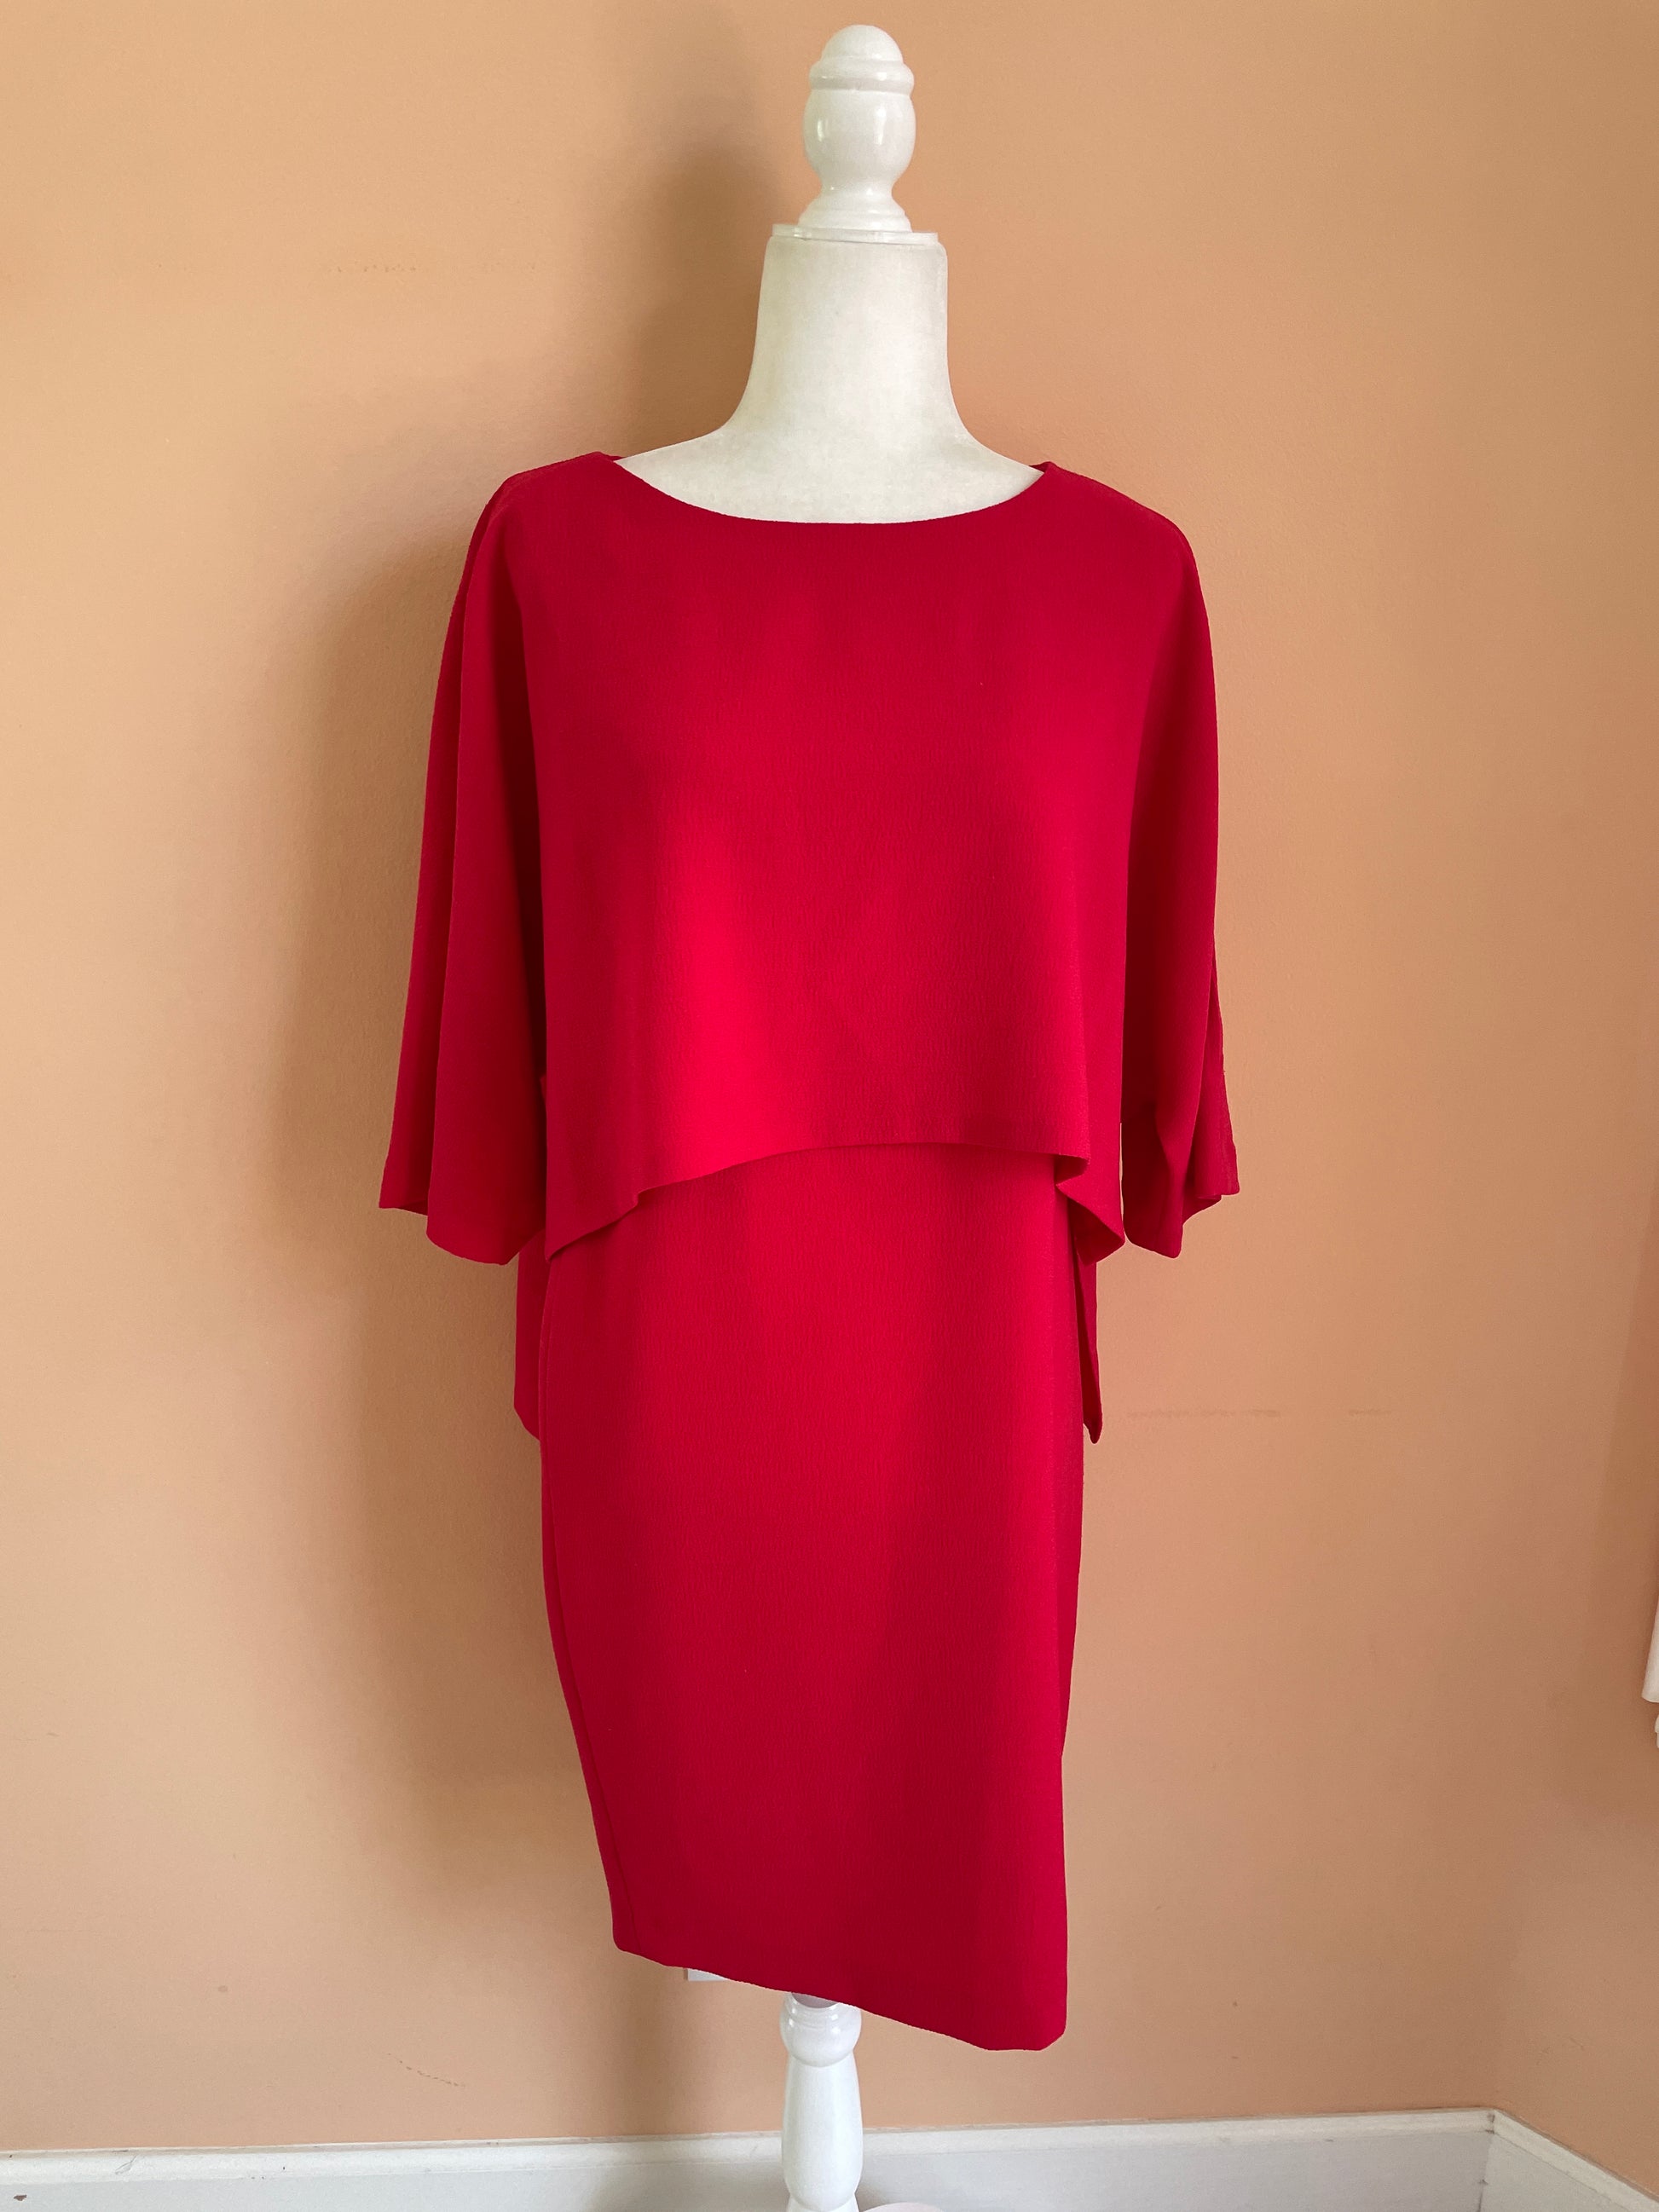 2000's red dress 2000s Adrianna Papell Red Poly Designer Cape Knee Length Dress